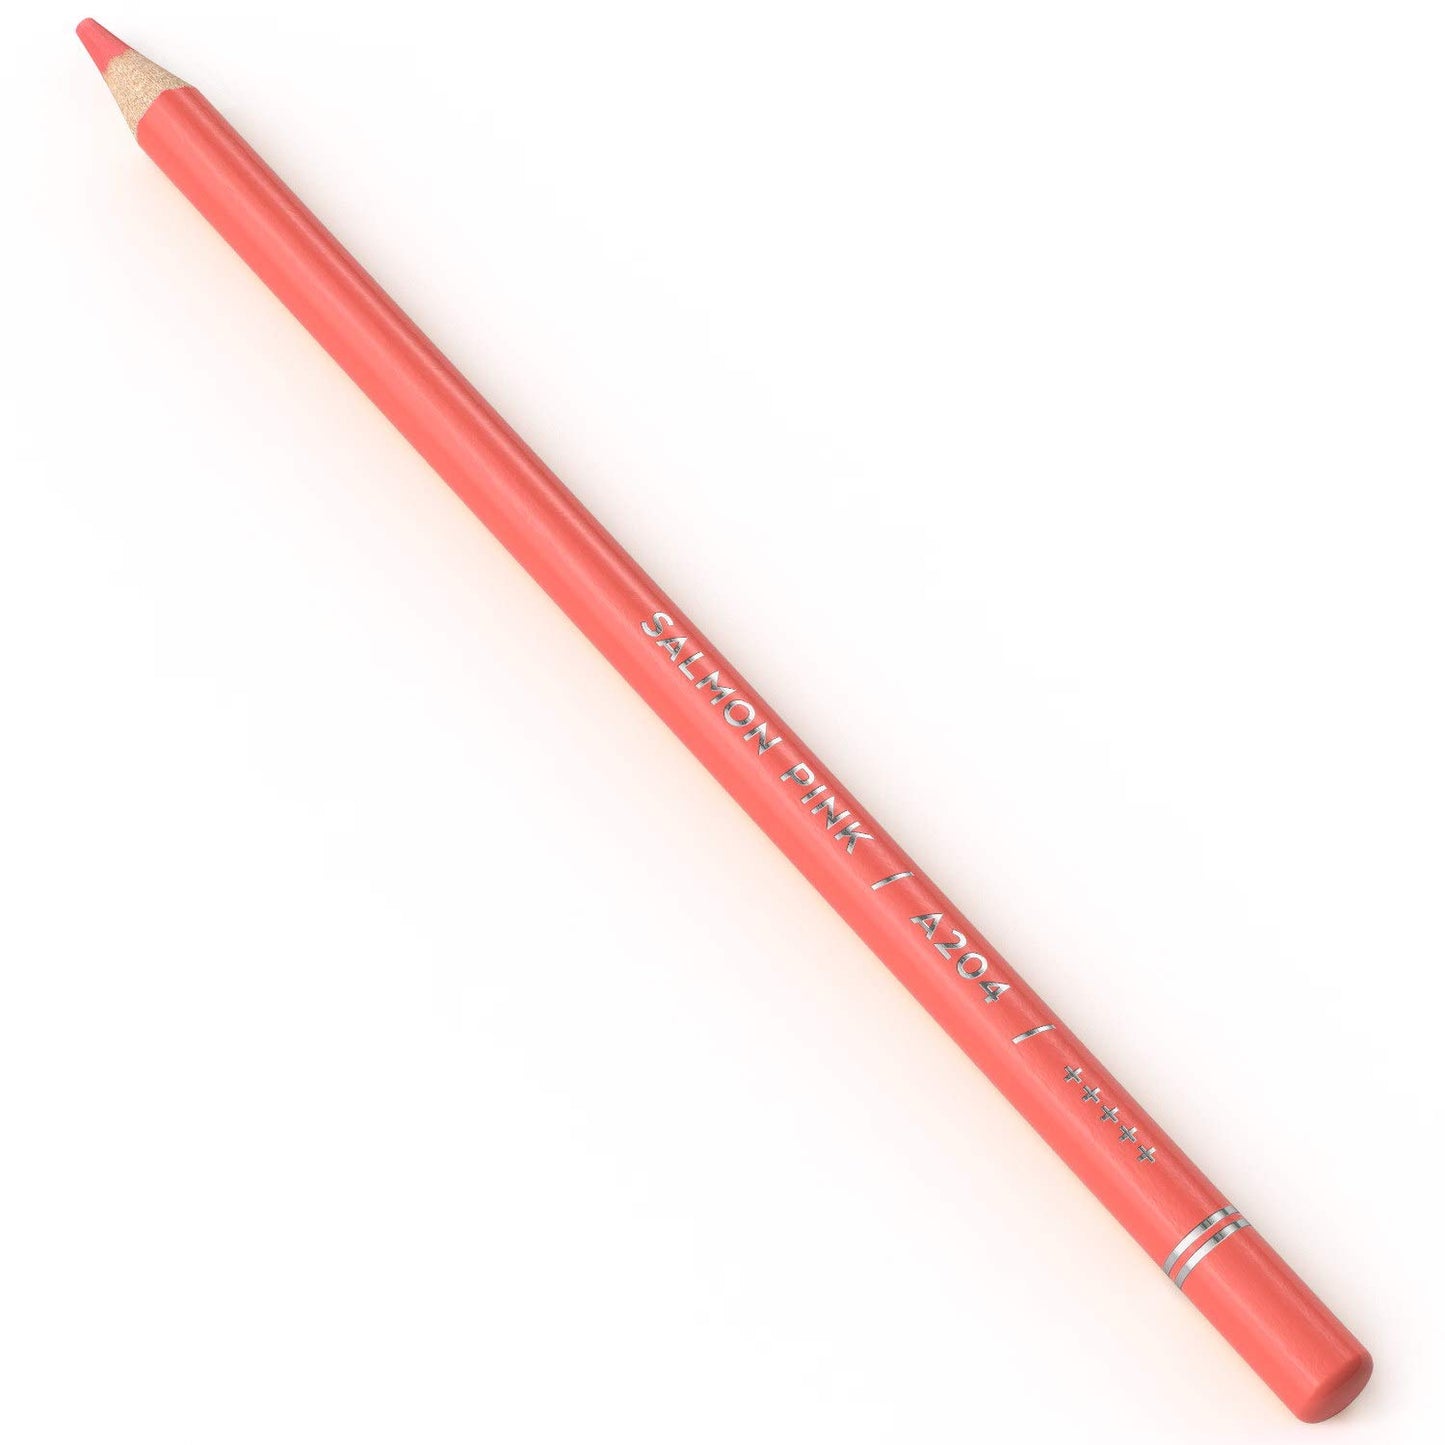 Arteza Expert Colored Pencils, A204 Salmon Pink - 3 Pack